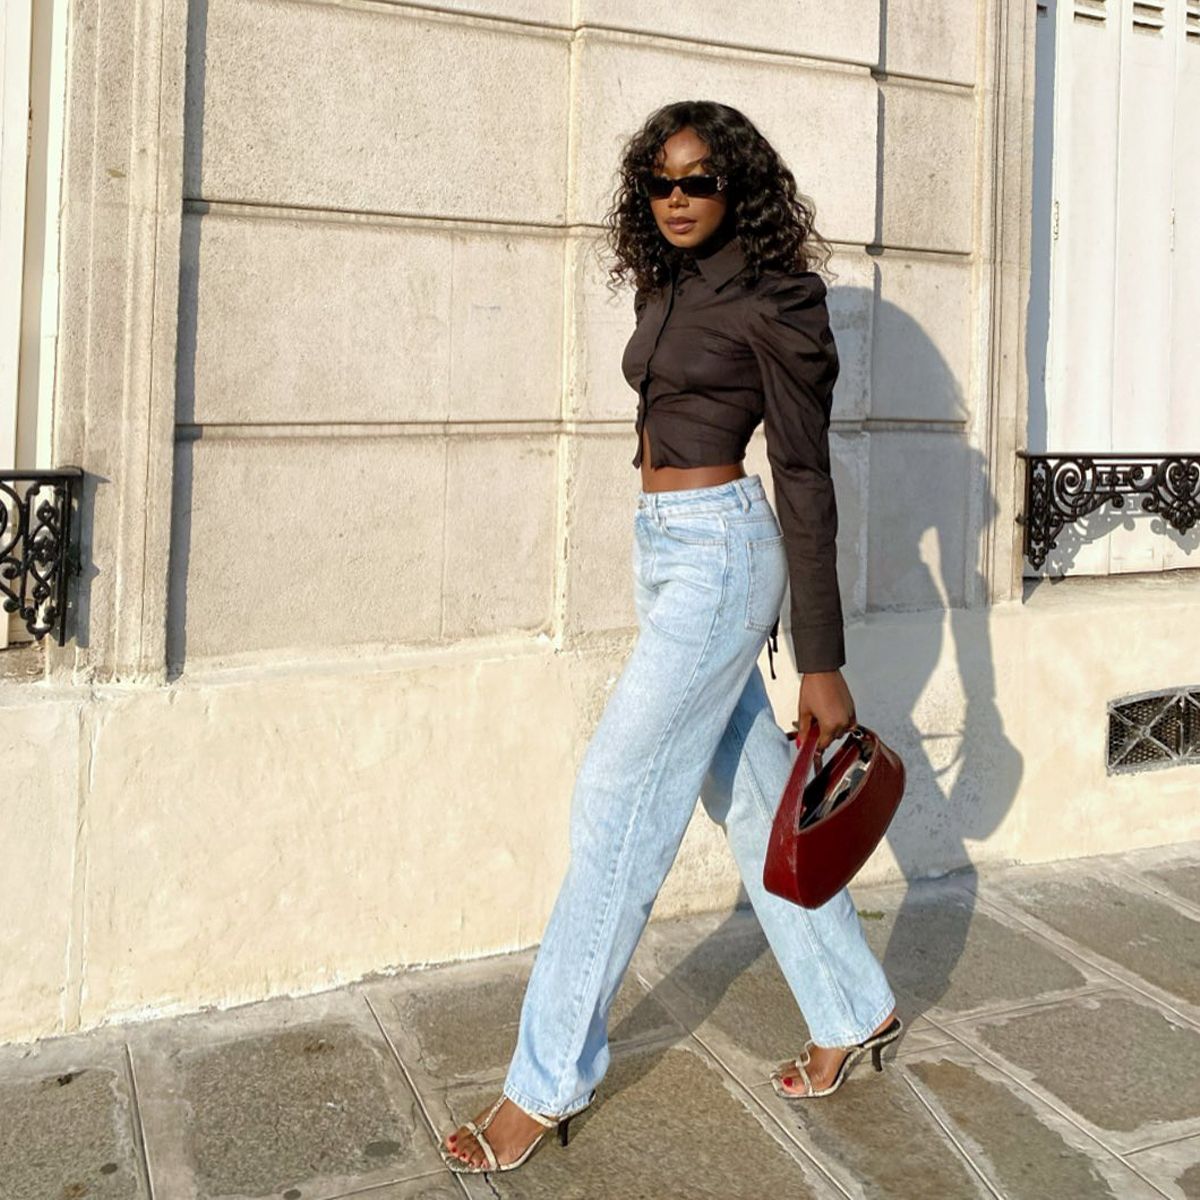 French Women Love the High-Rise Wide-Leg Jeans Trend